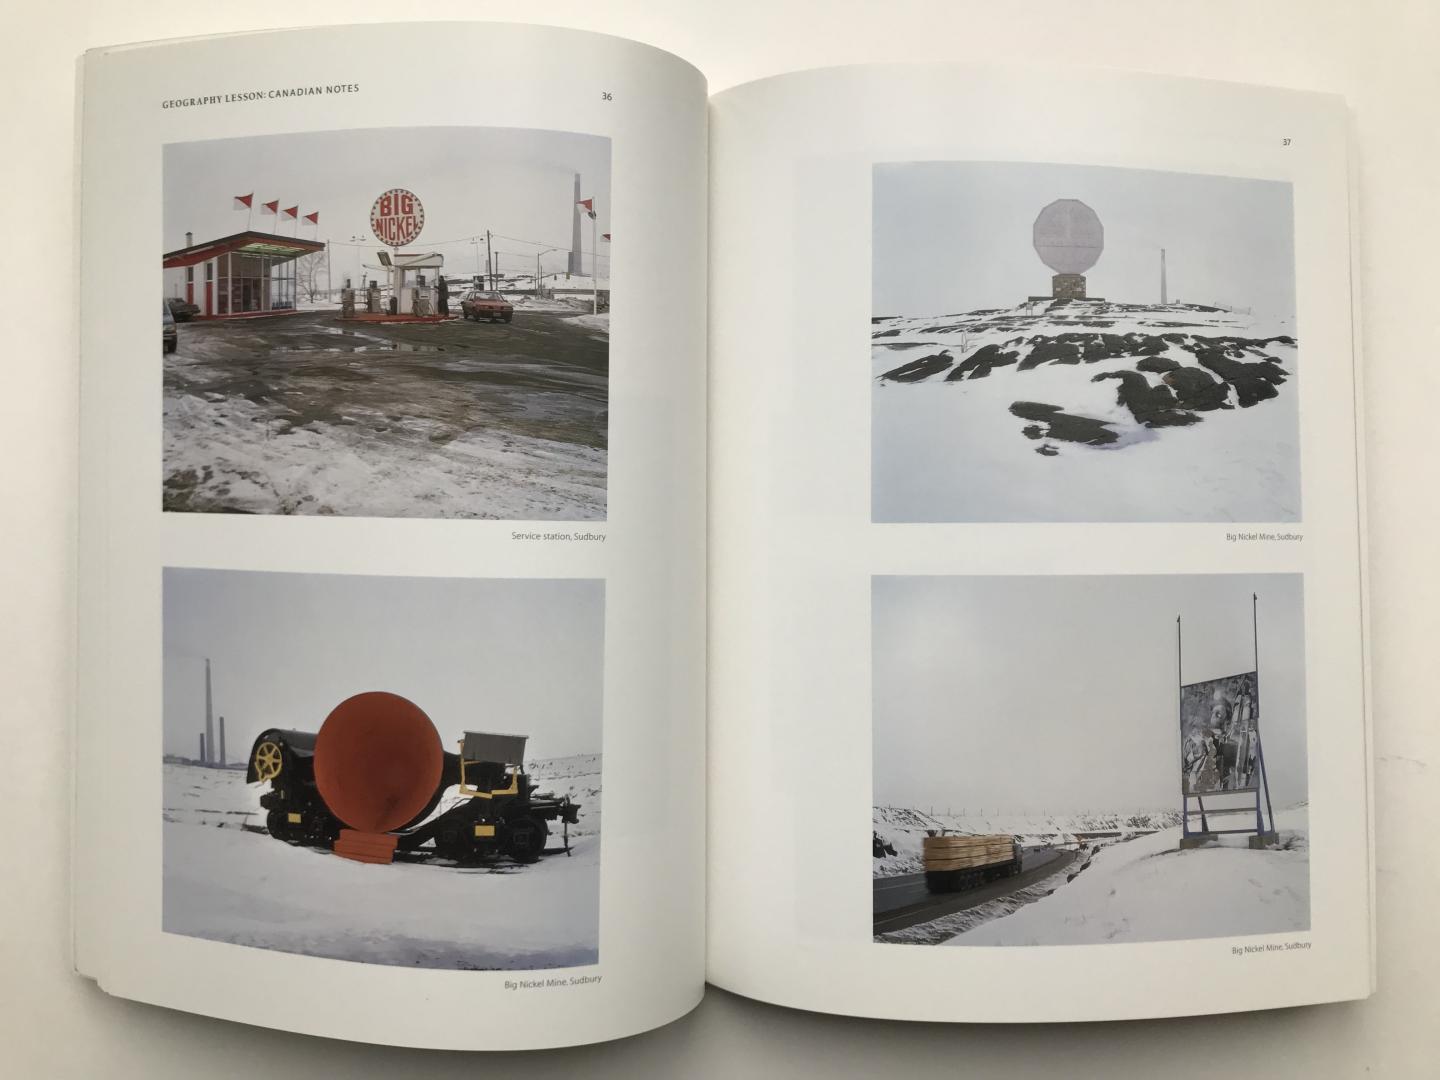 Allan Sekula - Geography Lessons: Canadian Notes